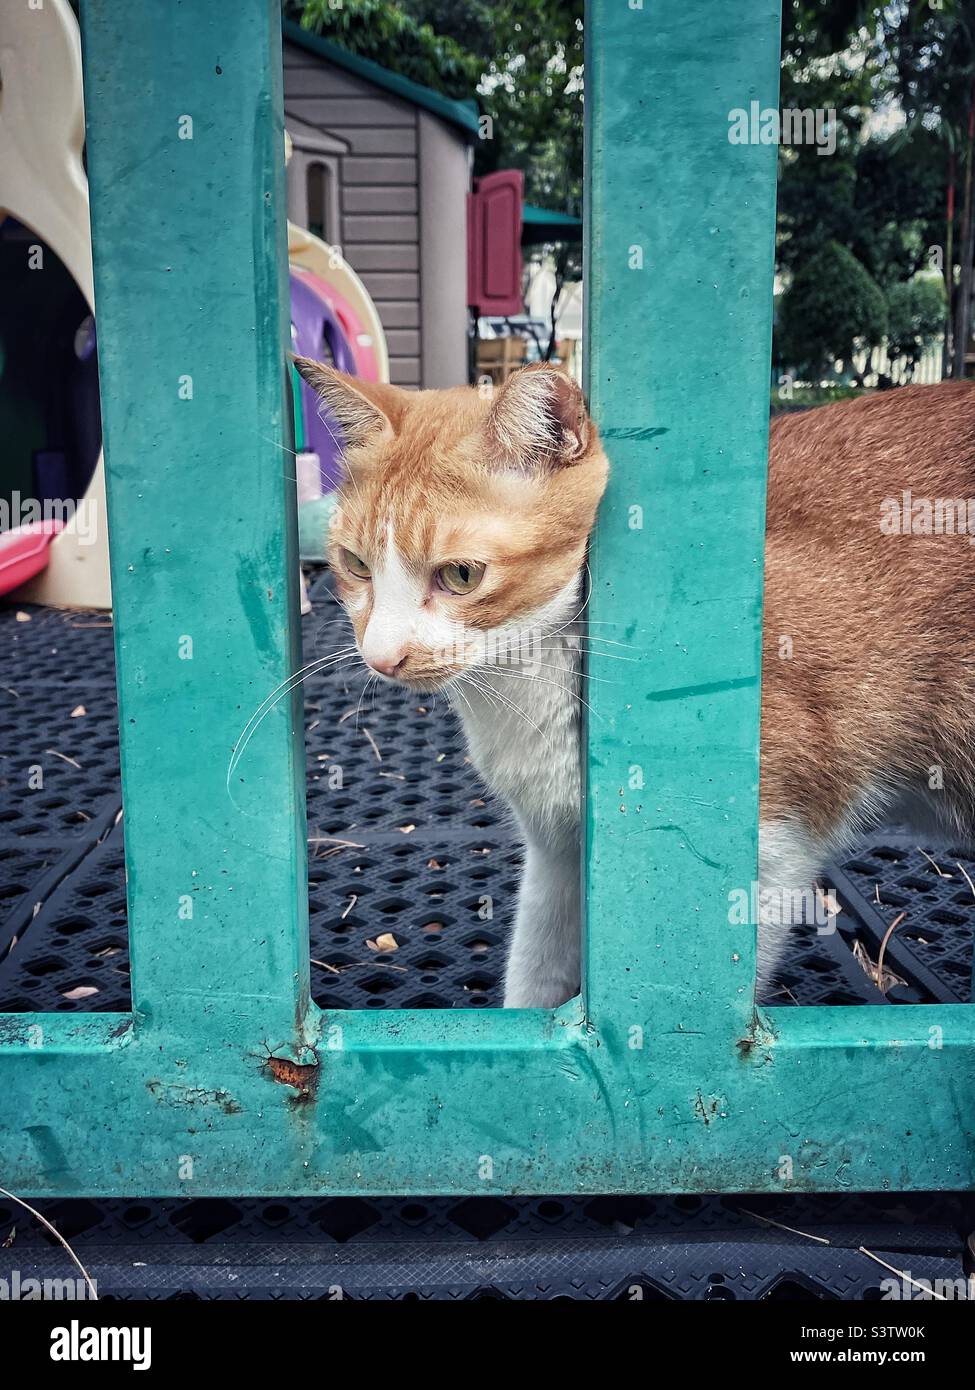 A cat behind a fence Stock Photo